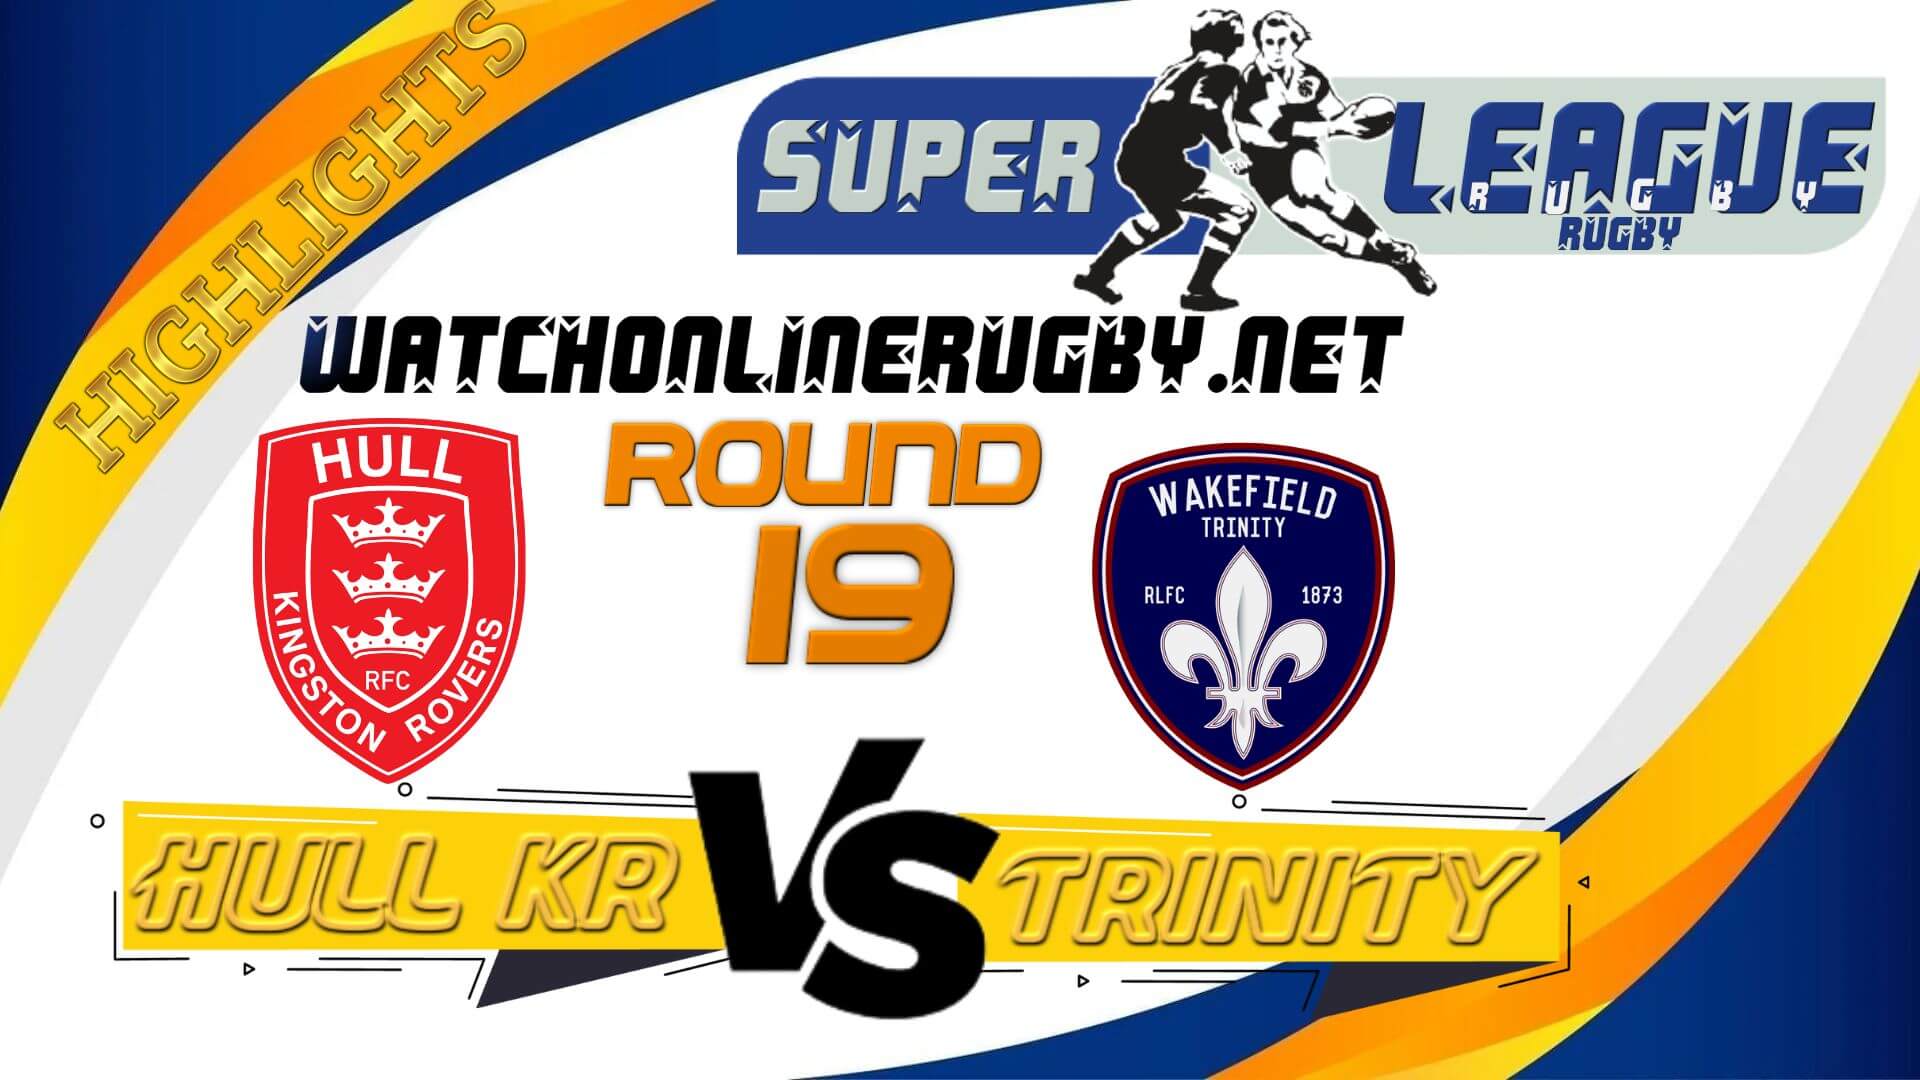 Hull KR Vs Wakefield Trinity Super League Rugby 2022 RD 19